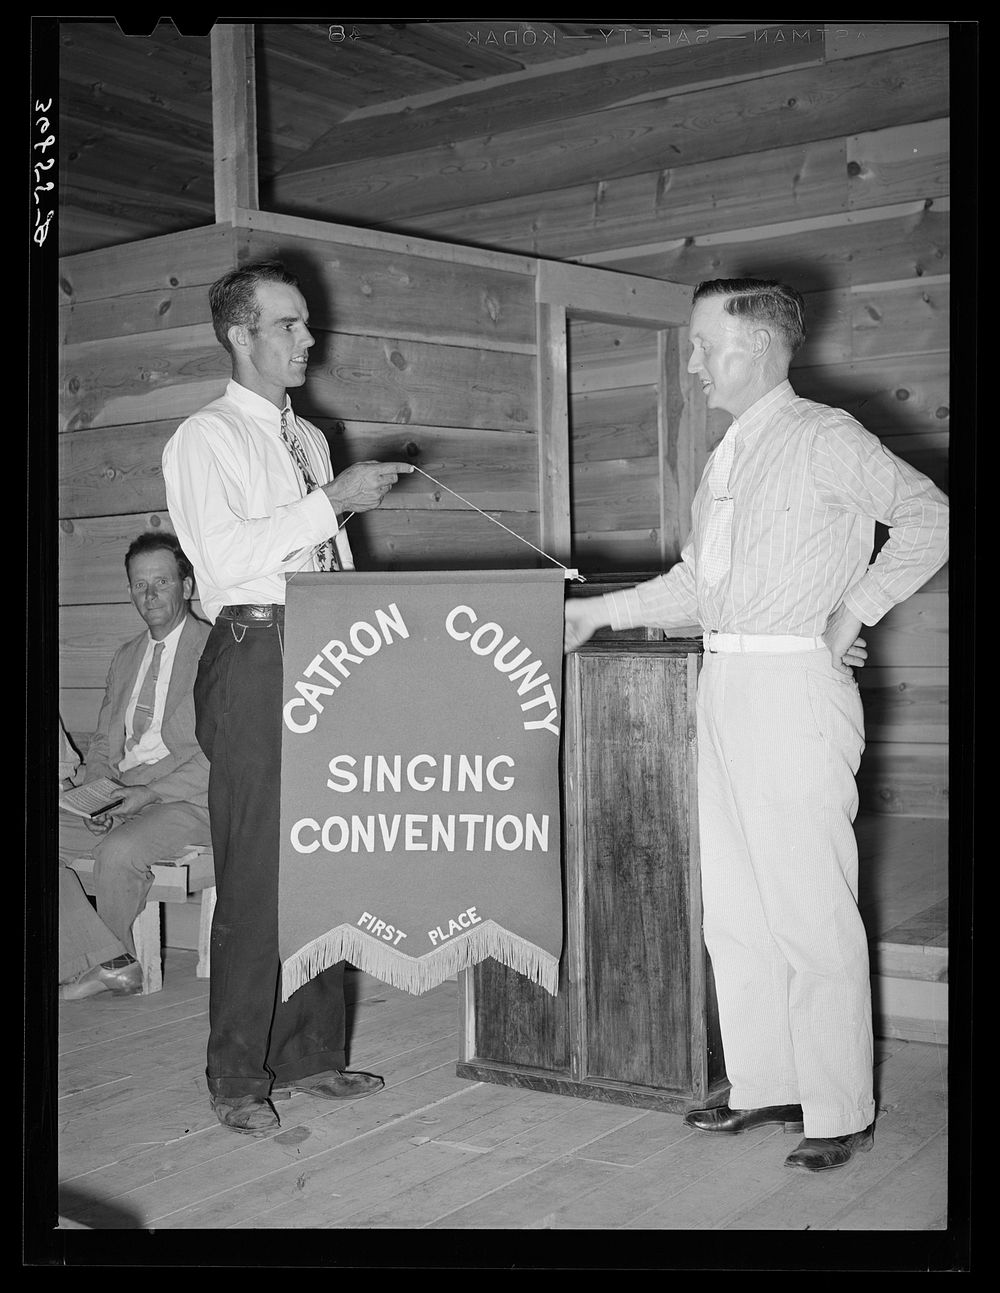 President of the singing convention. He is also a homesteader, on the right presenting the banner to Mr. Whinery as…